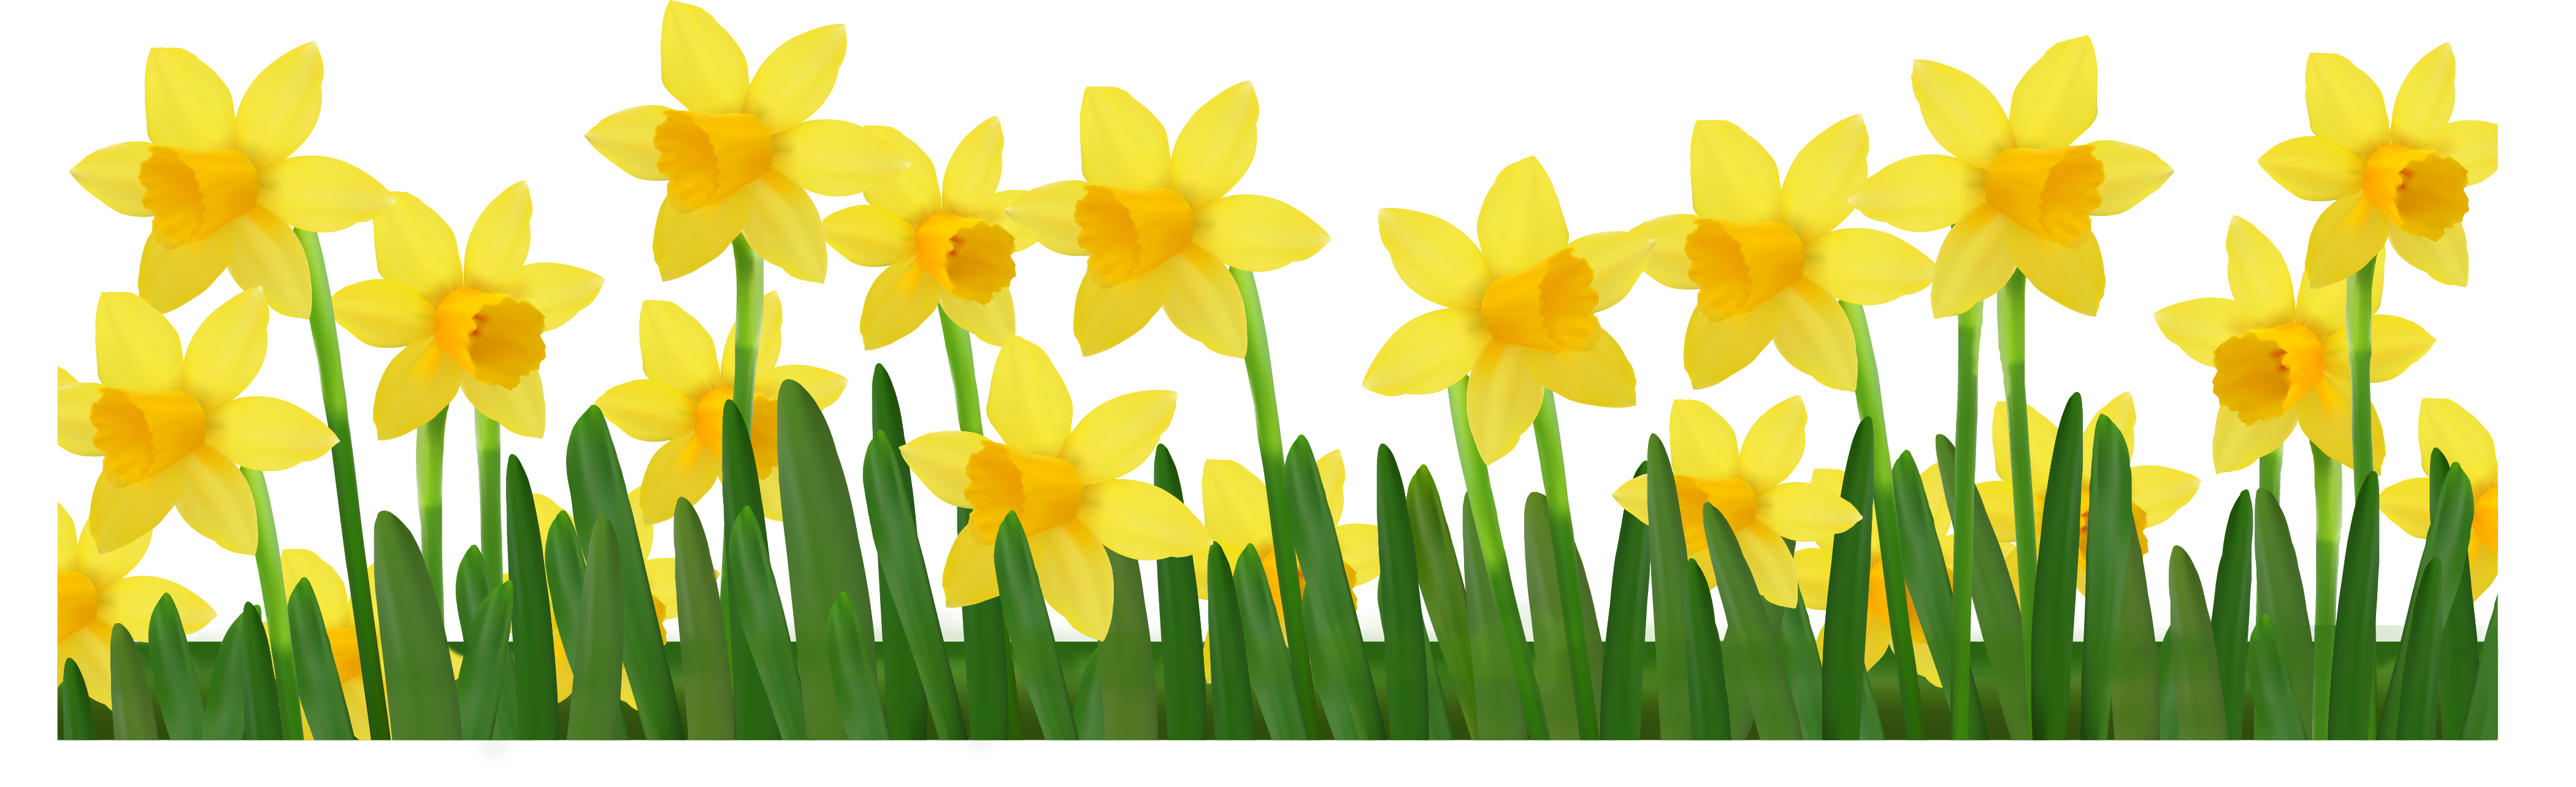 clipart daffodils images - photo #42